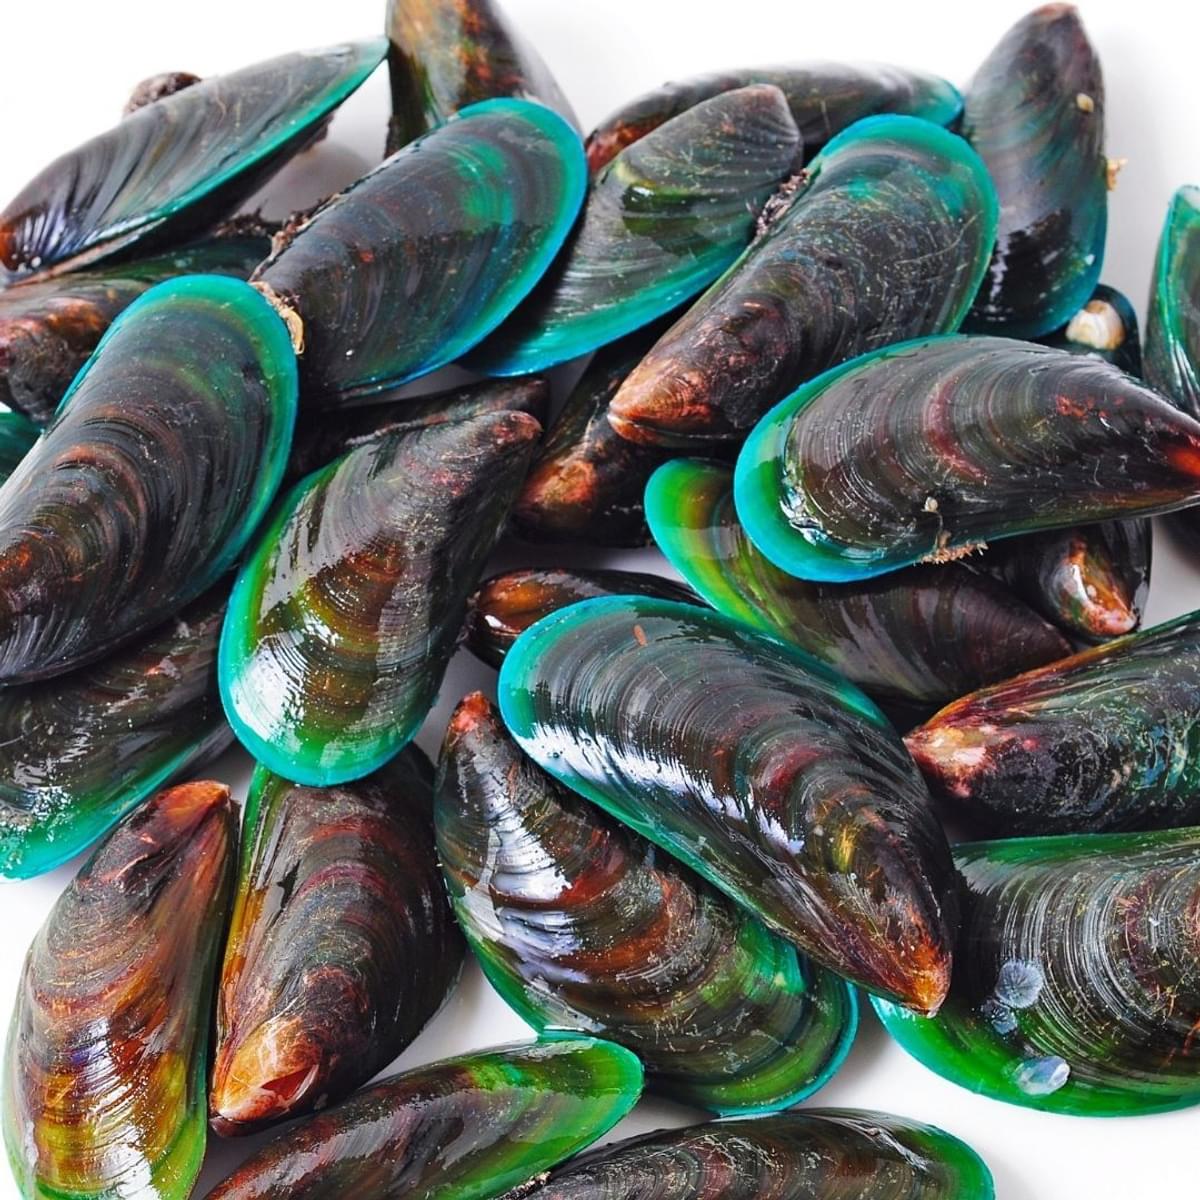 Green lipped mussel square shutterstock